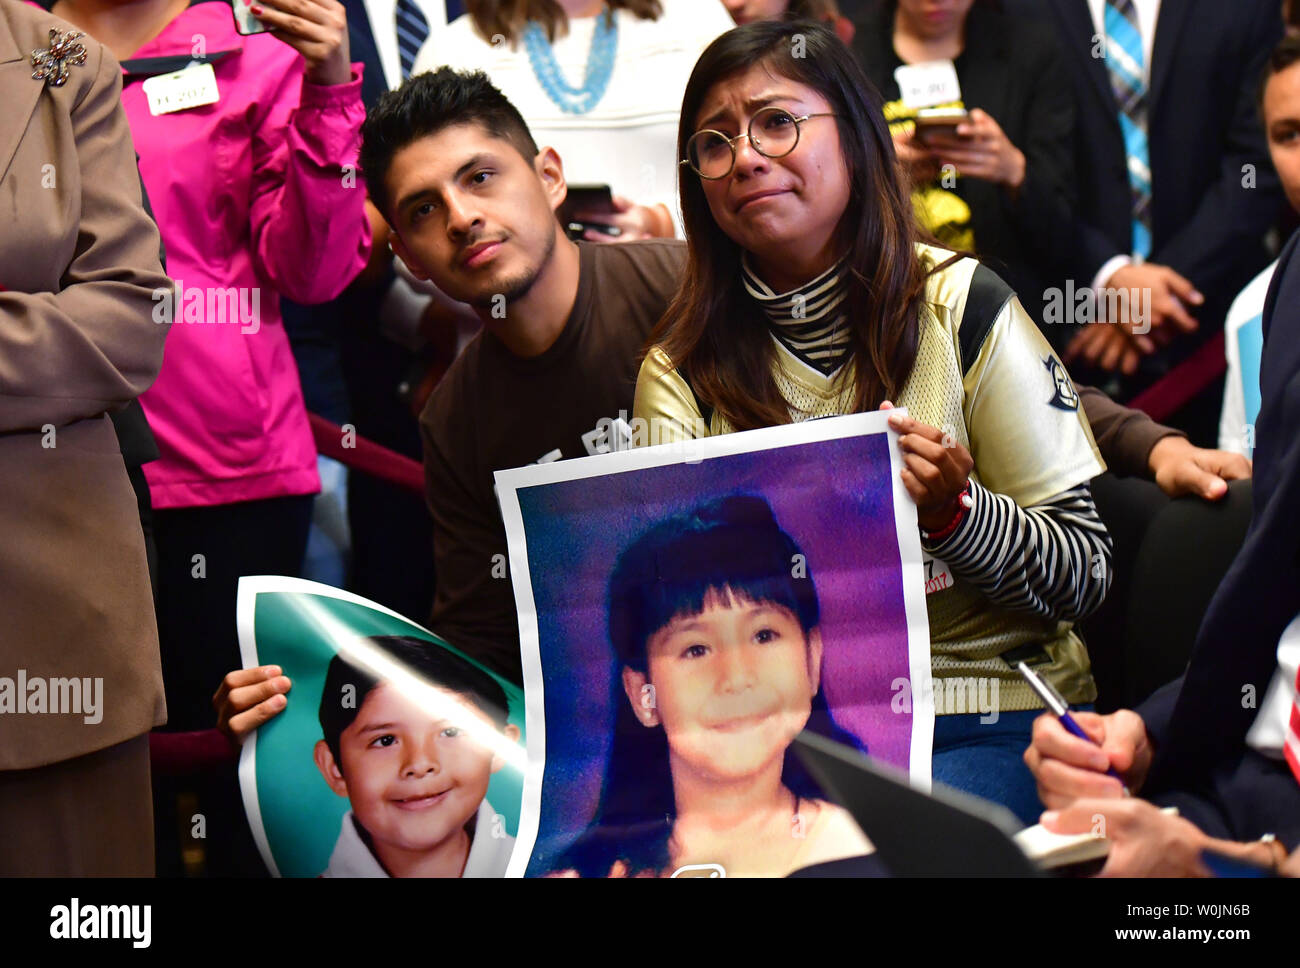 Karen Caudillo (R), 21, and Jario Reyes, 25, both affected by the DACA program attend a Democratic press conference calling on Congressional Republicans to stop the wind down of the Deferred Action for Childhood Arrivals (DACA) initiative at the U.S. Caption in Washington, D.C. on September 6, 2017. Photo by Kevin Dietsch/UPI Stock Photo